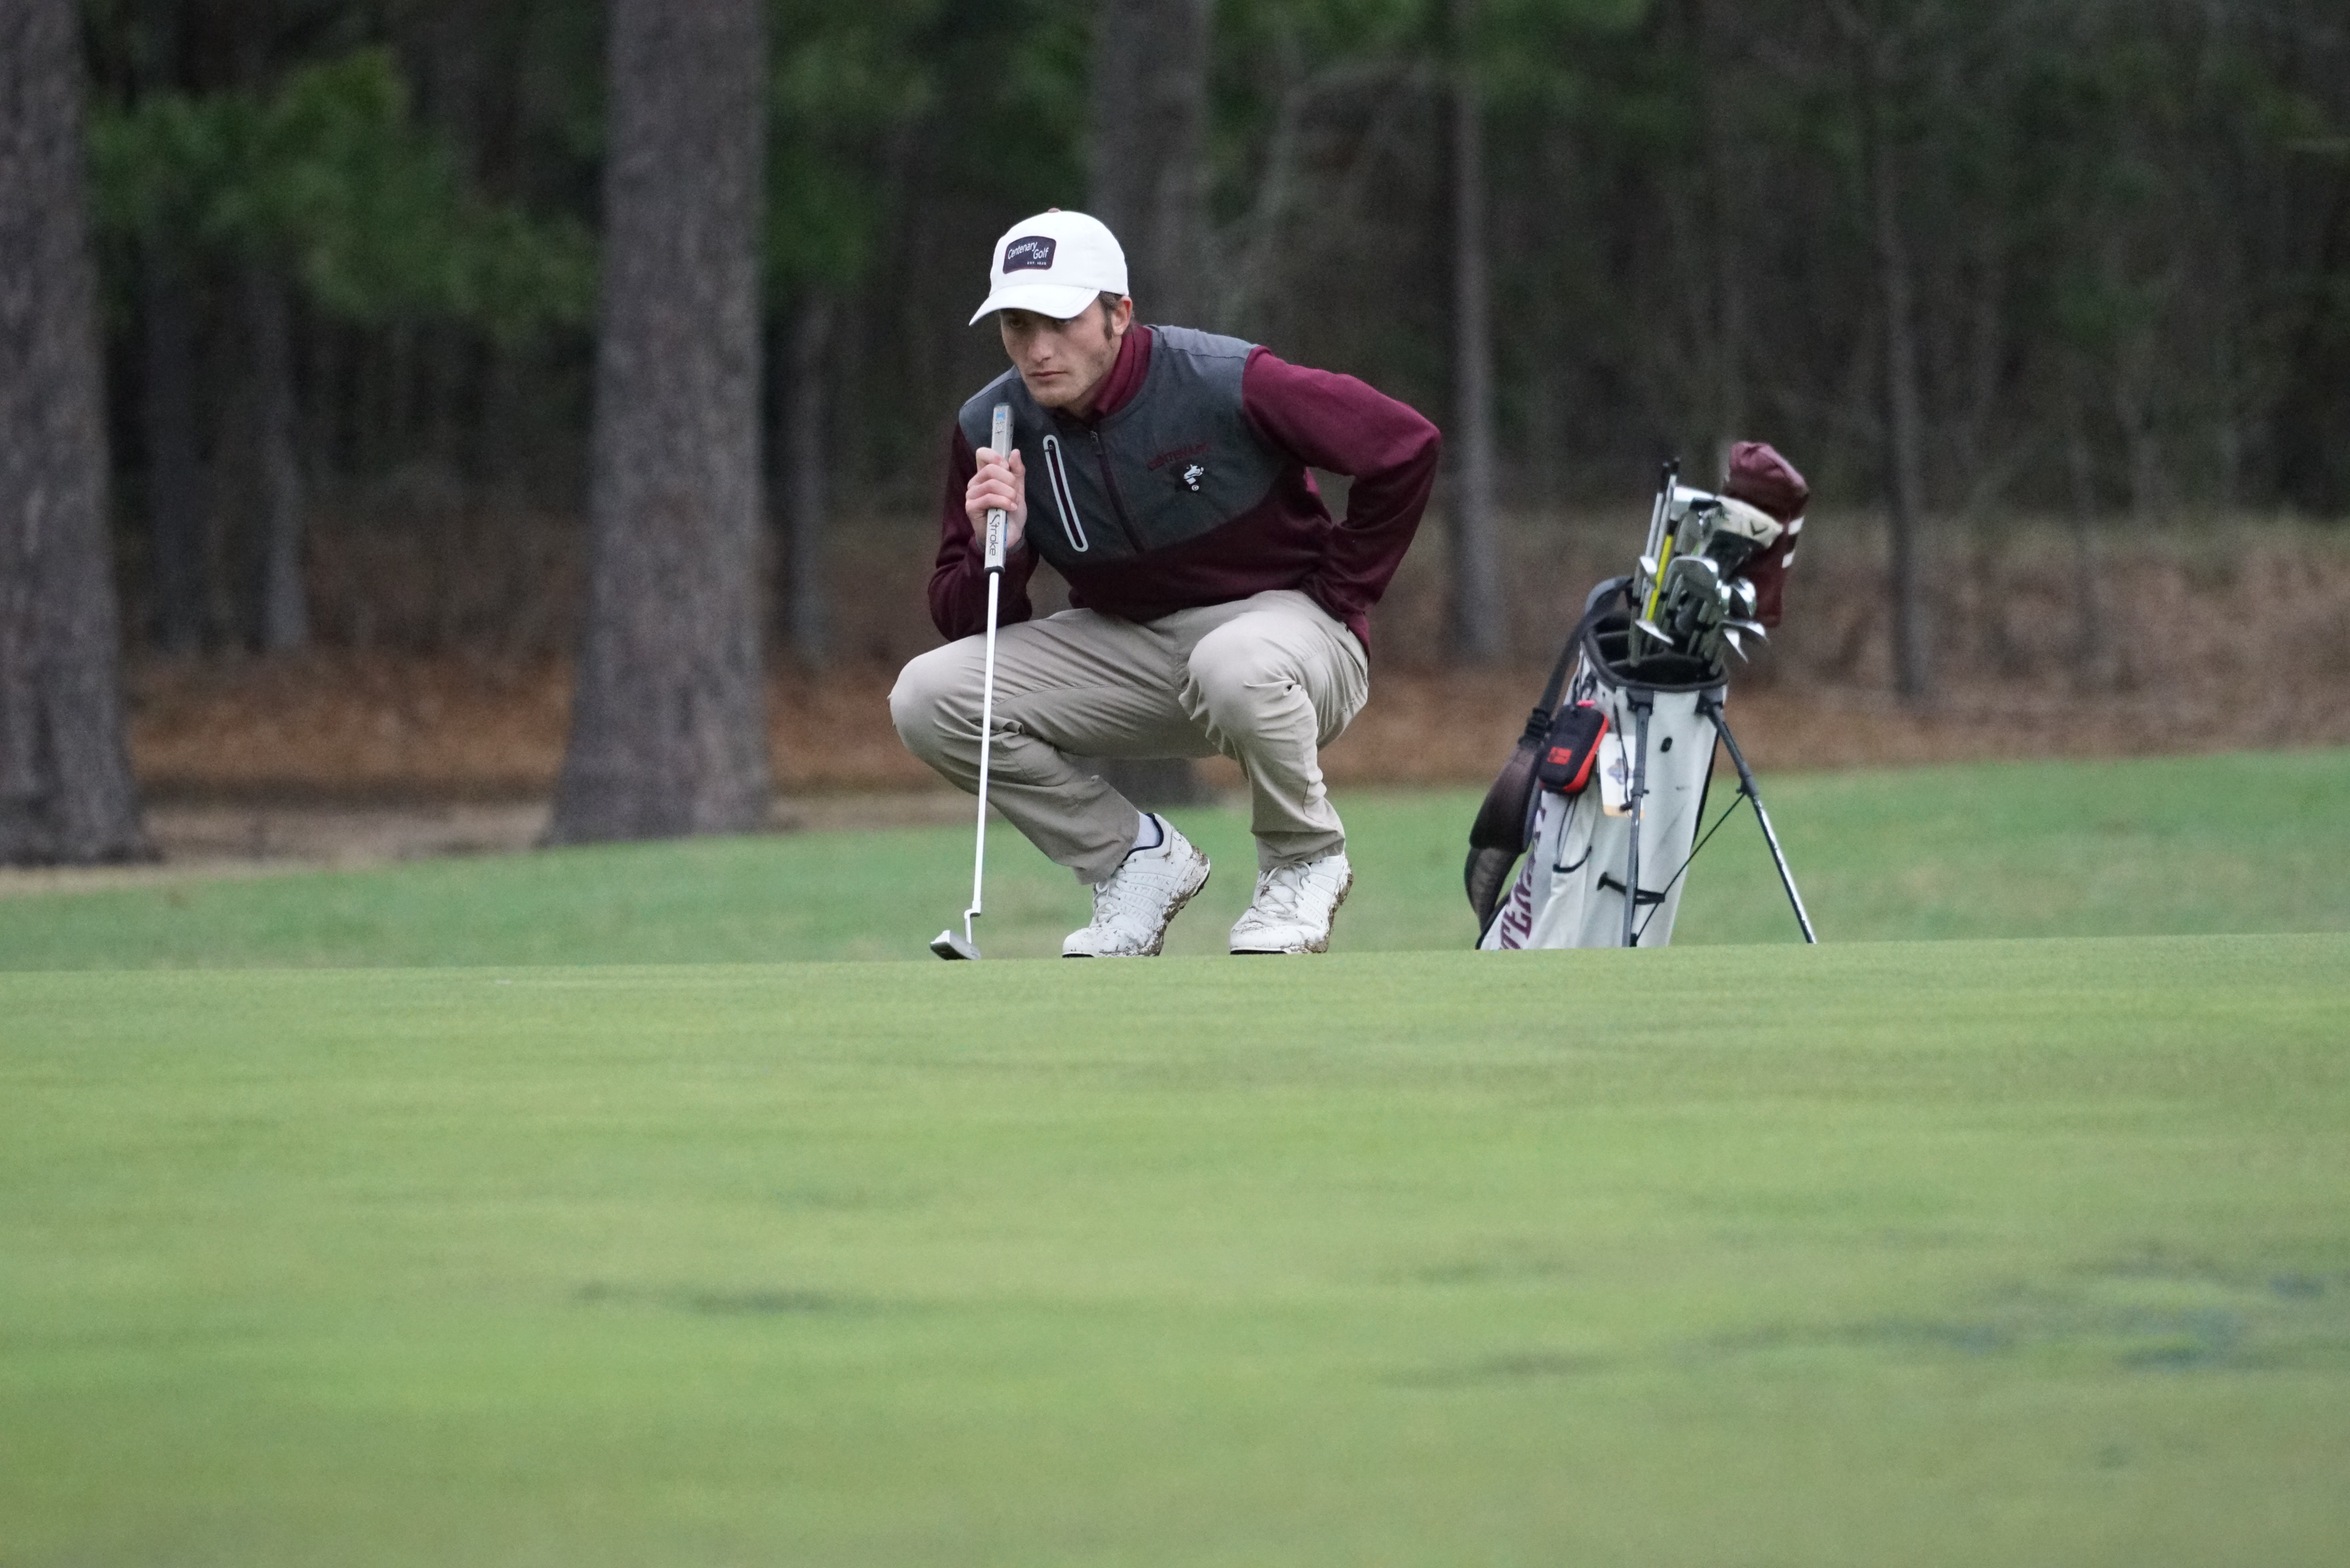 Senior Andrew Bennett earned a fifth-place finish on Tuesday in the Gents' home tournament.